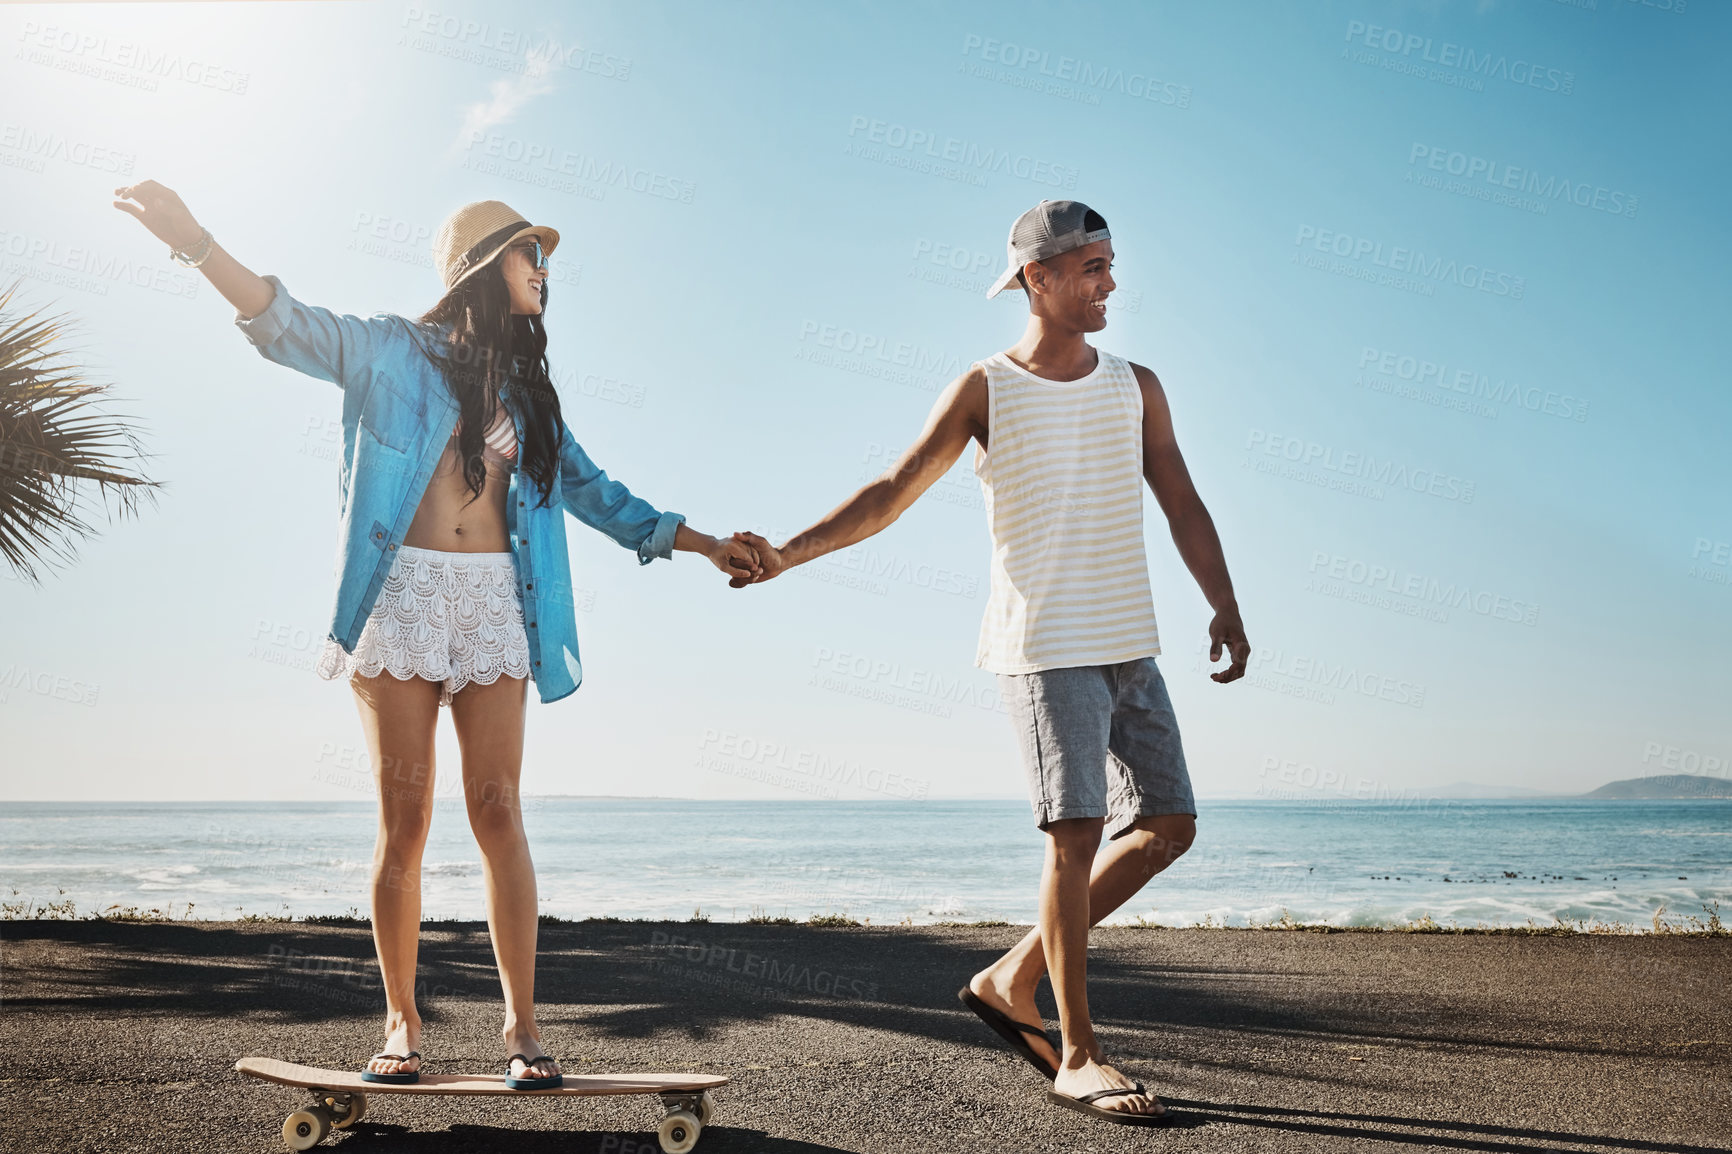 Buy stock photo Shot of a young man teaching his girlfriend how to skateboard on the promenade